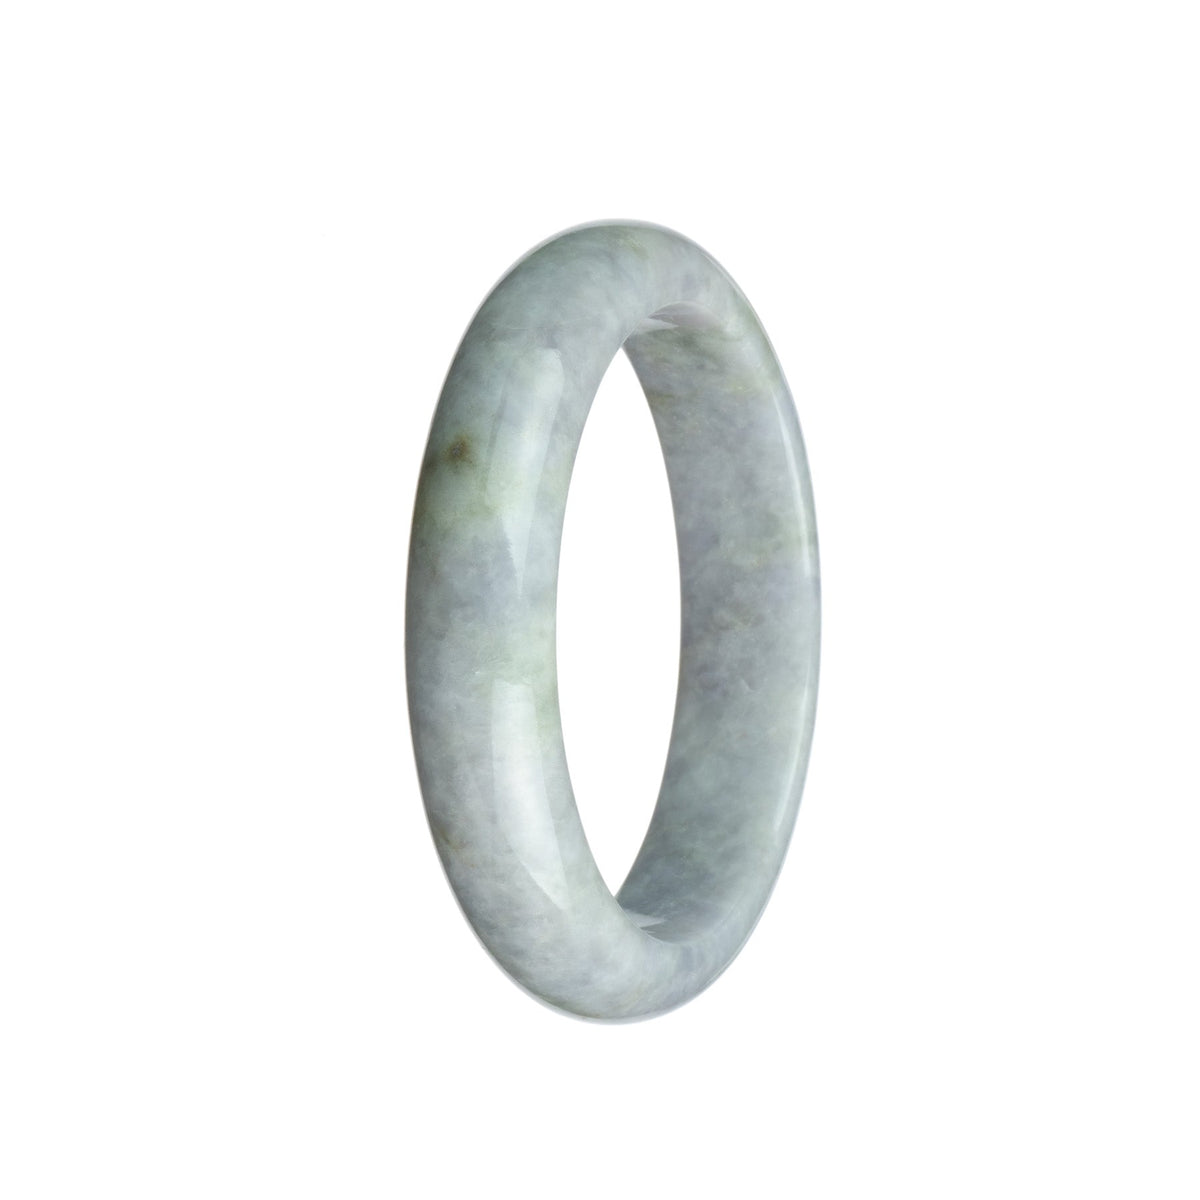 "A light purple lavender jade bangle with a smooth half moon shape, made of high-quality Grade A jadeite. From the MAYS™ collection."